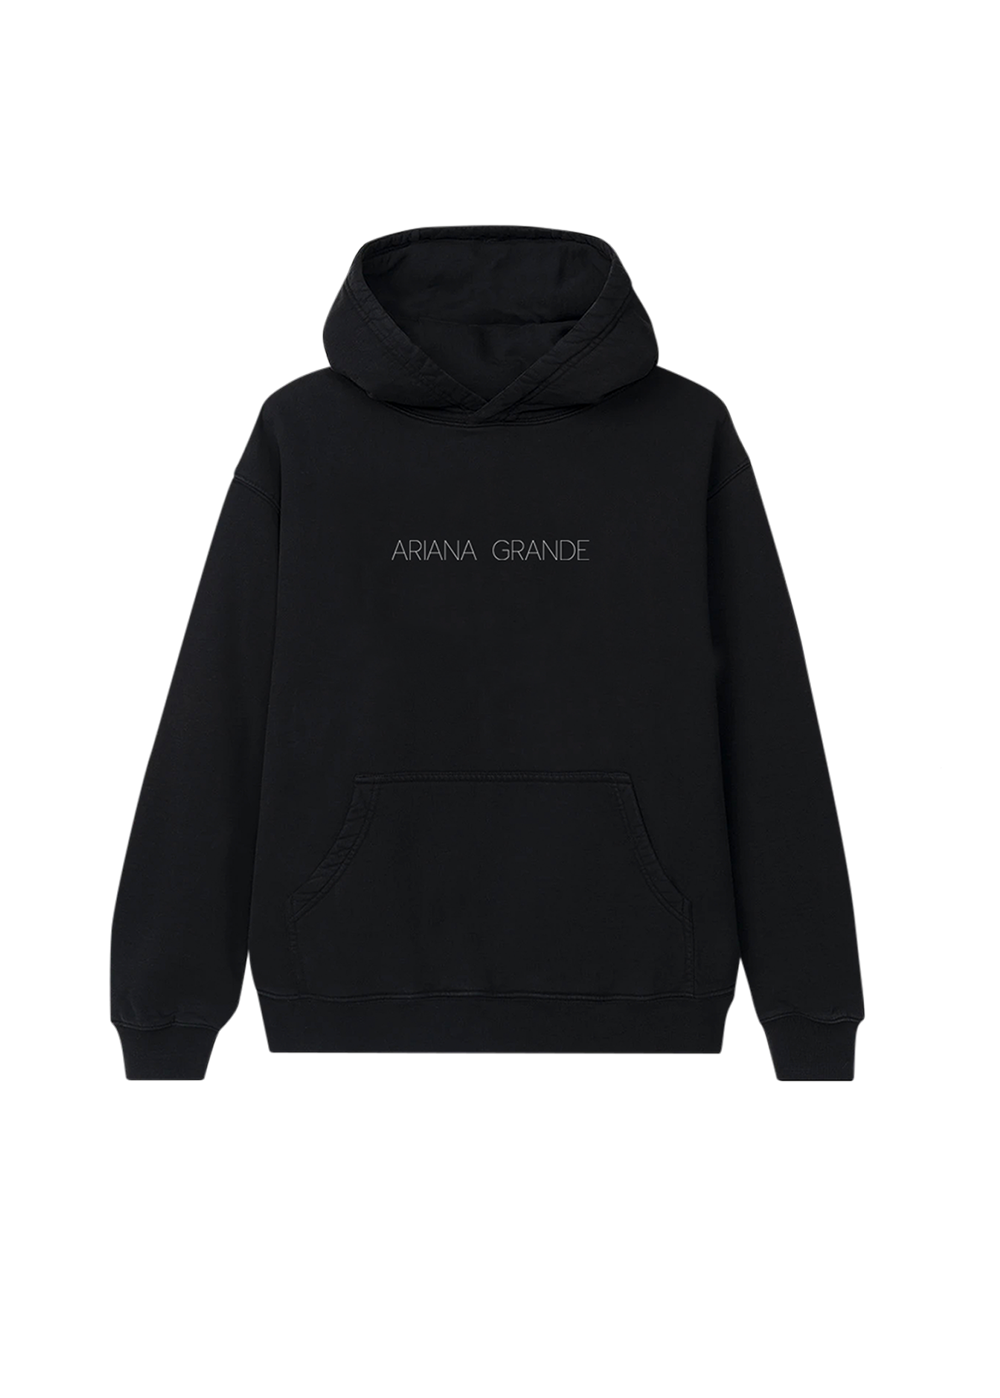 yourstrulyphotohoodiefront - Ariana Grande Store